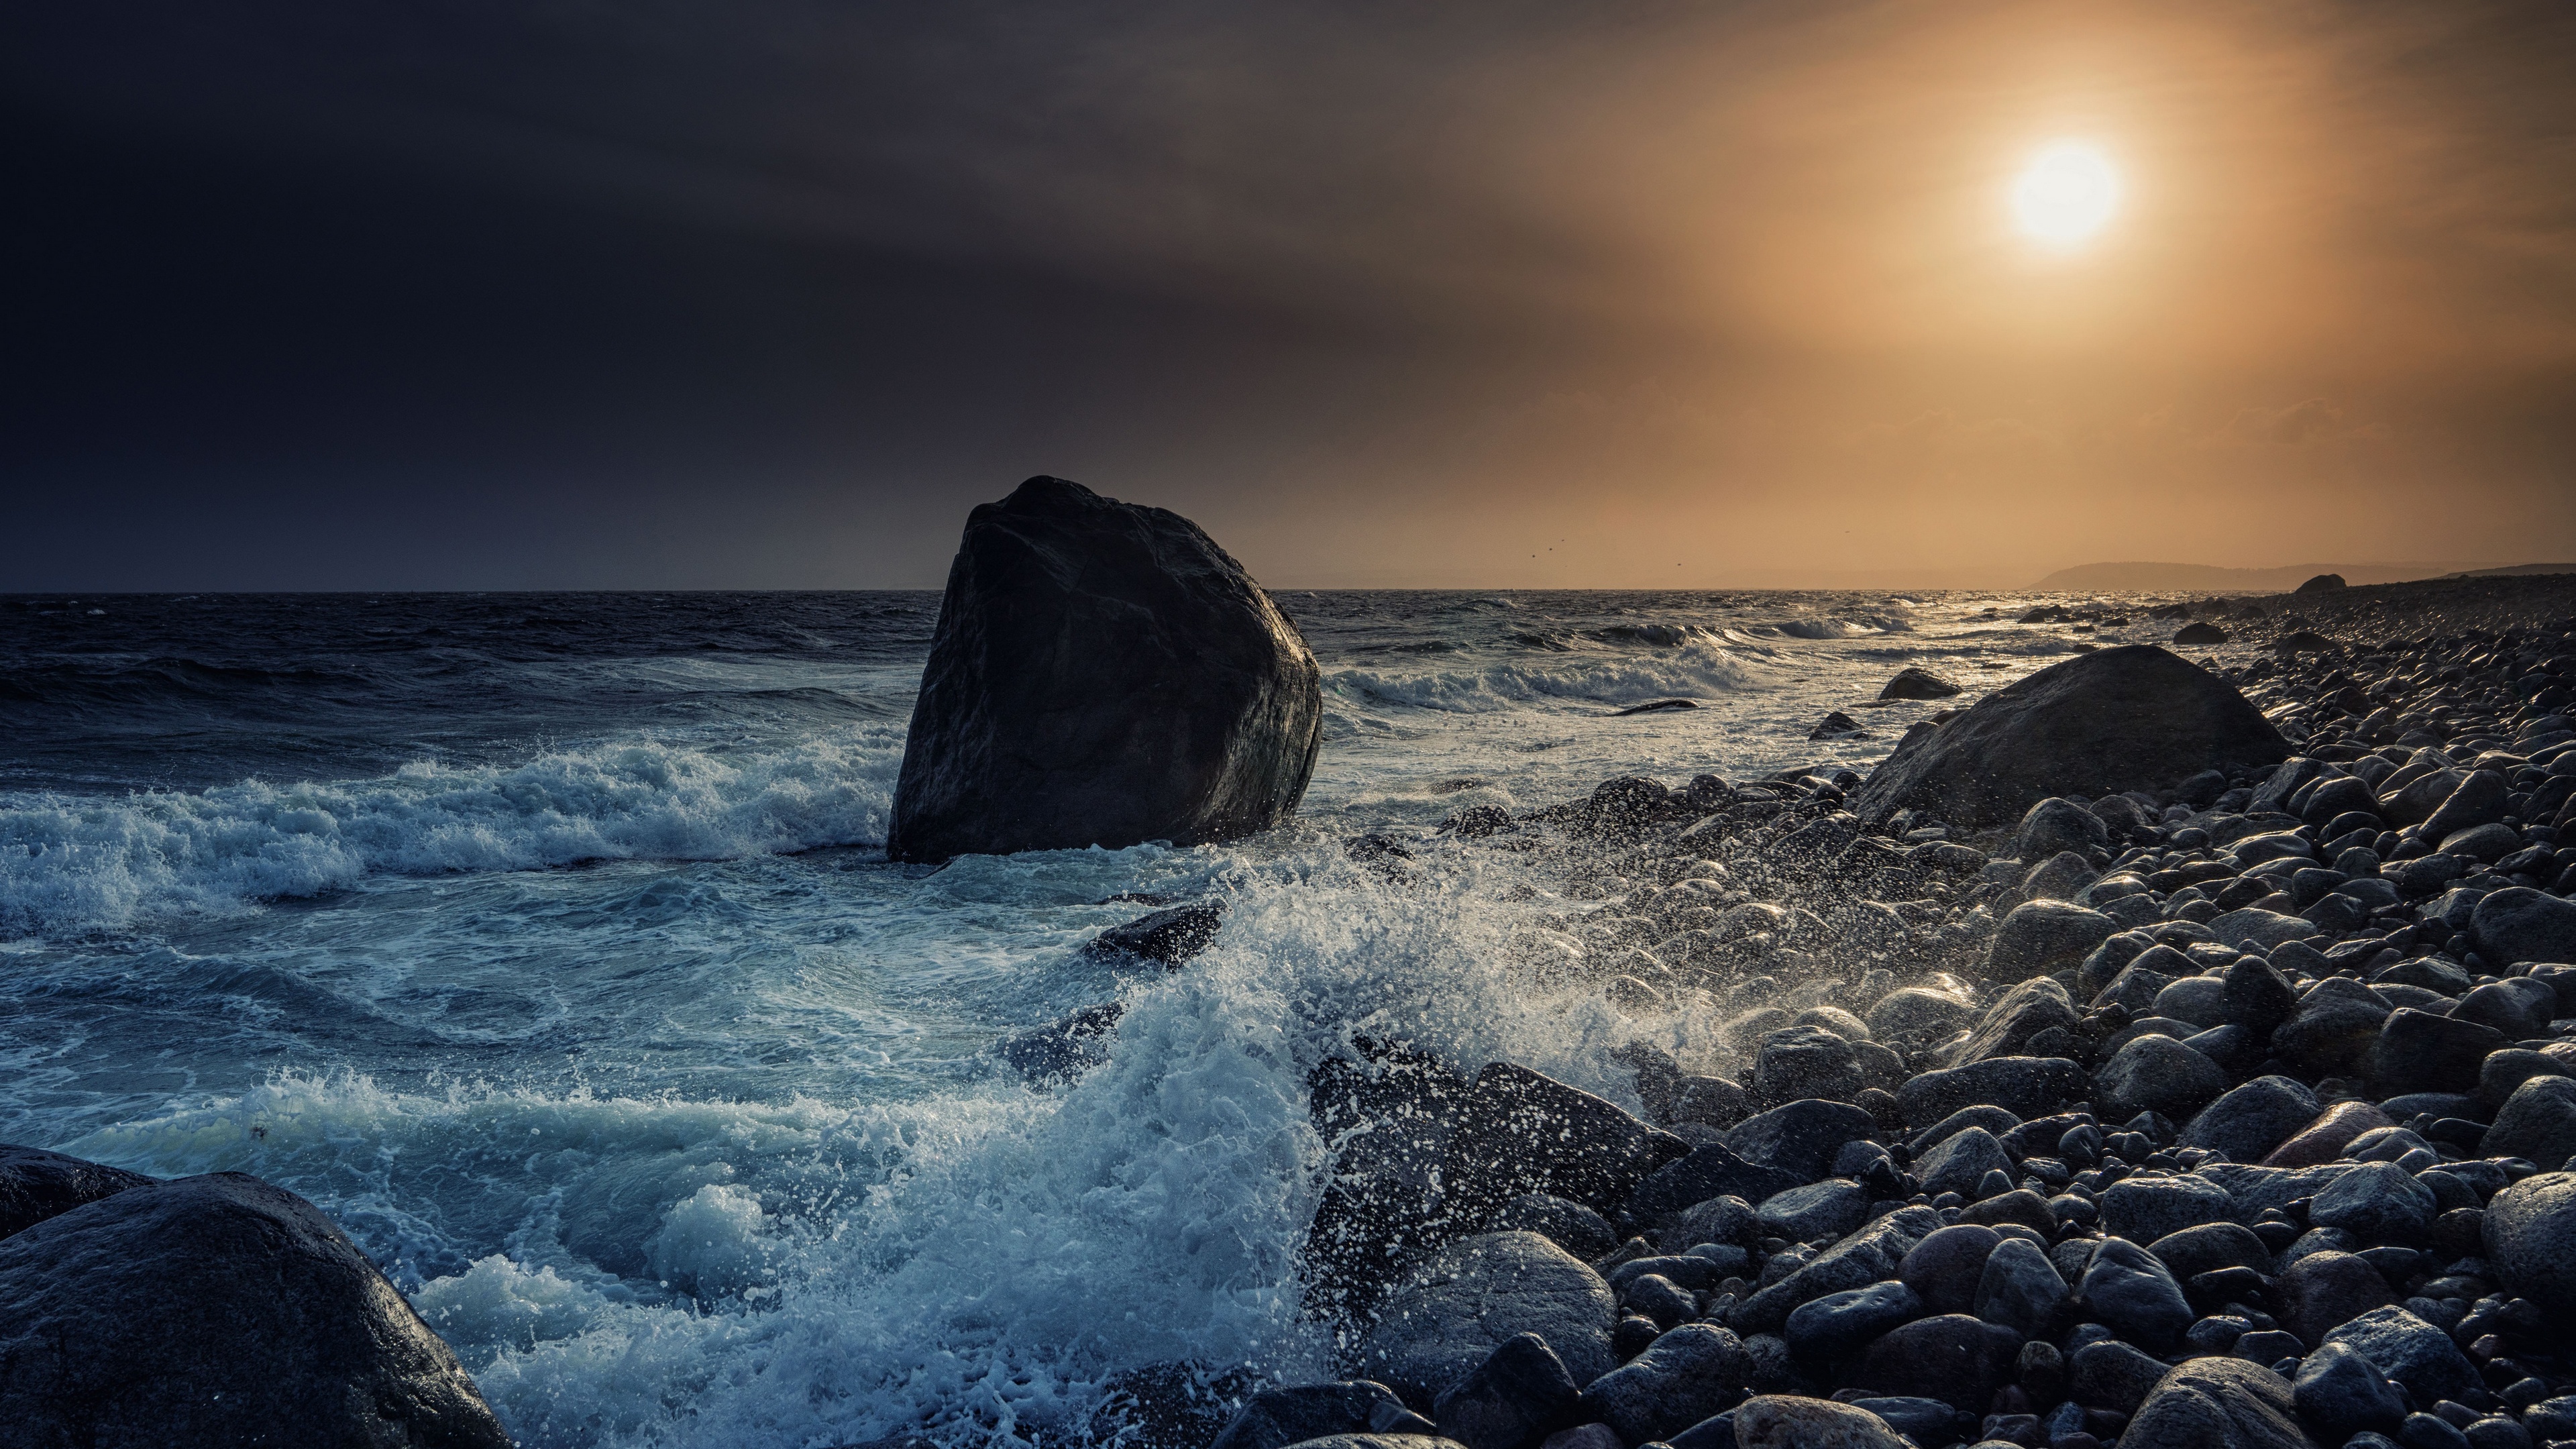 Norway Nature Sea Coast Waves Storm Stones Rock Sky Clouds Sunset Water 3840x2160